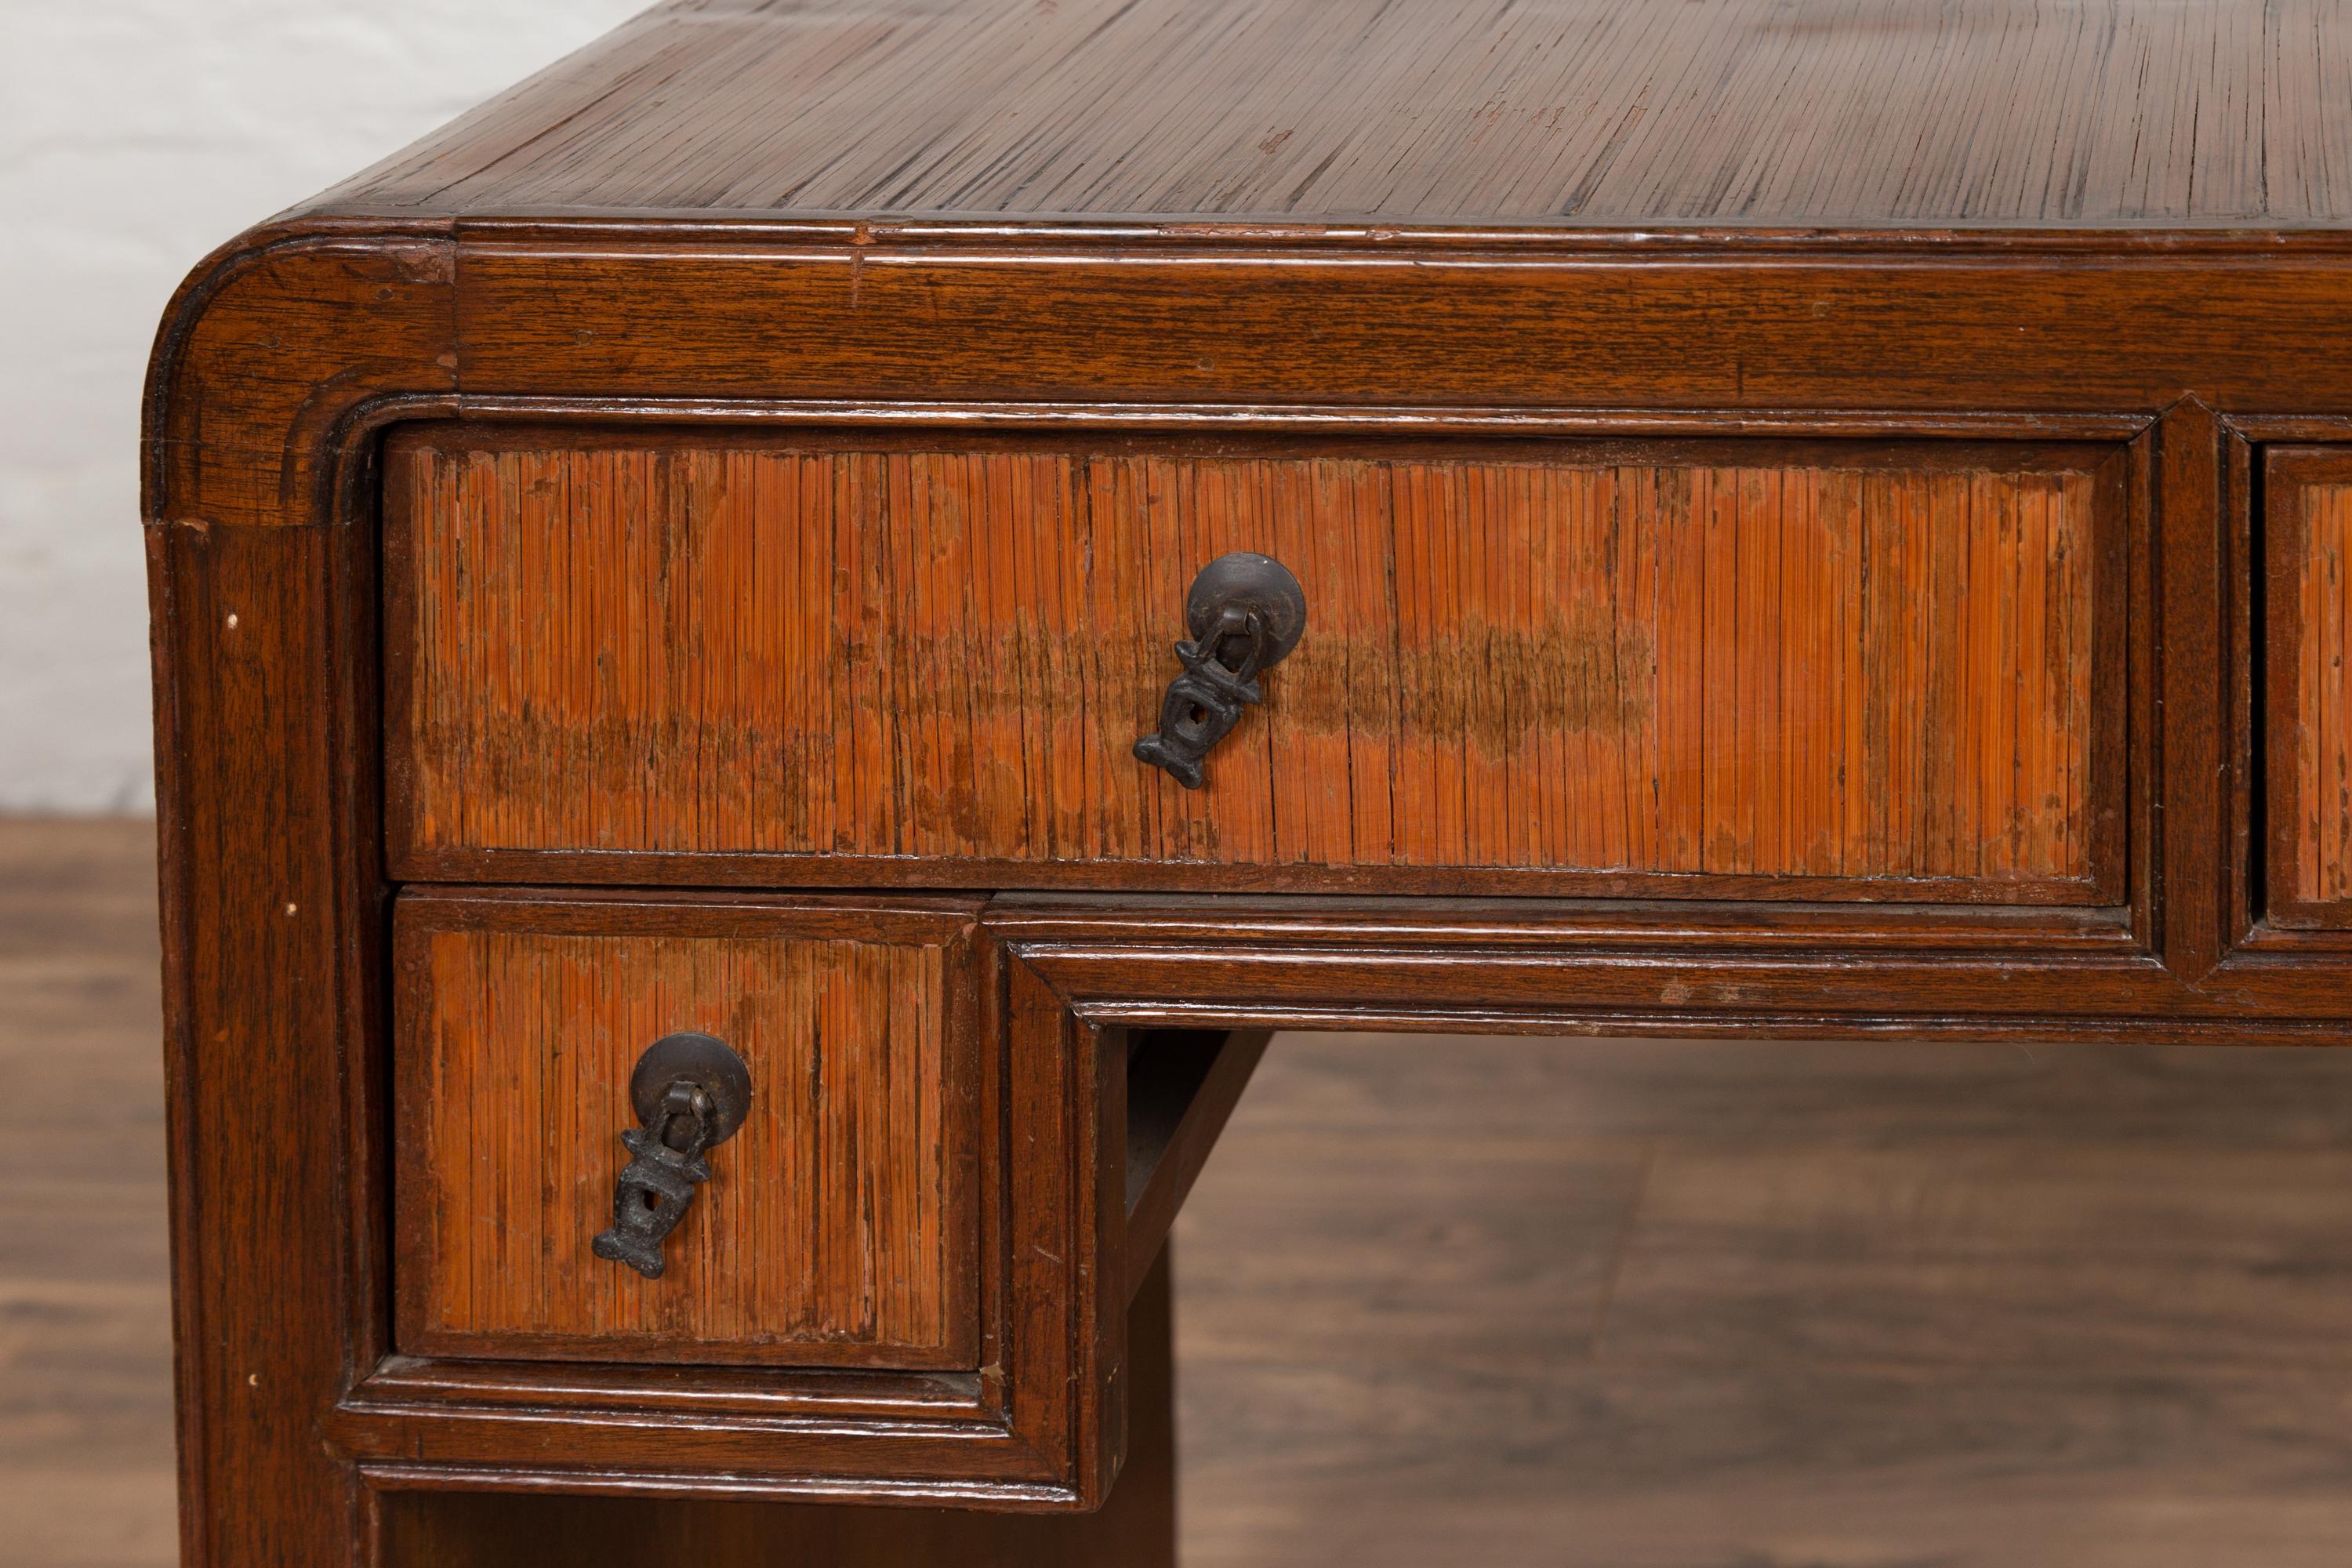 Wood Vintage Handmade Desk Found in Northern Thailand with Five Drawers, circa 1950